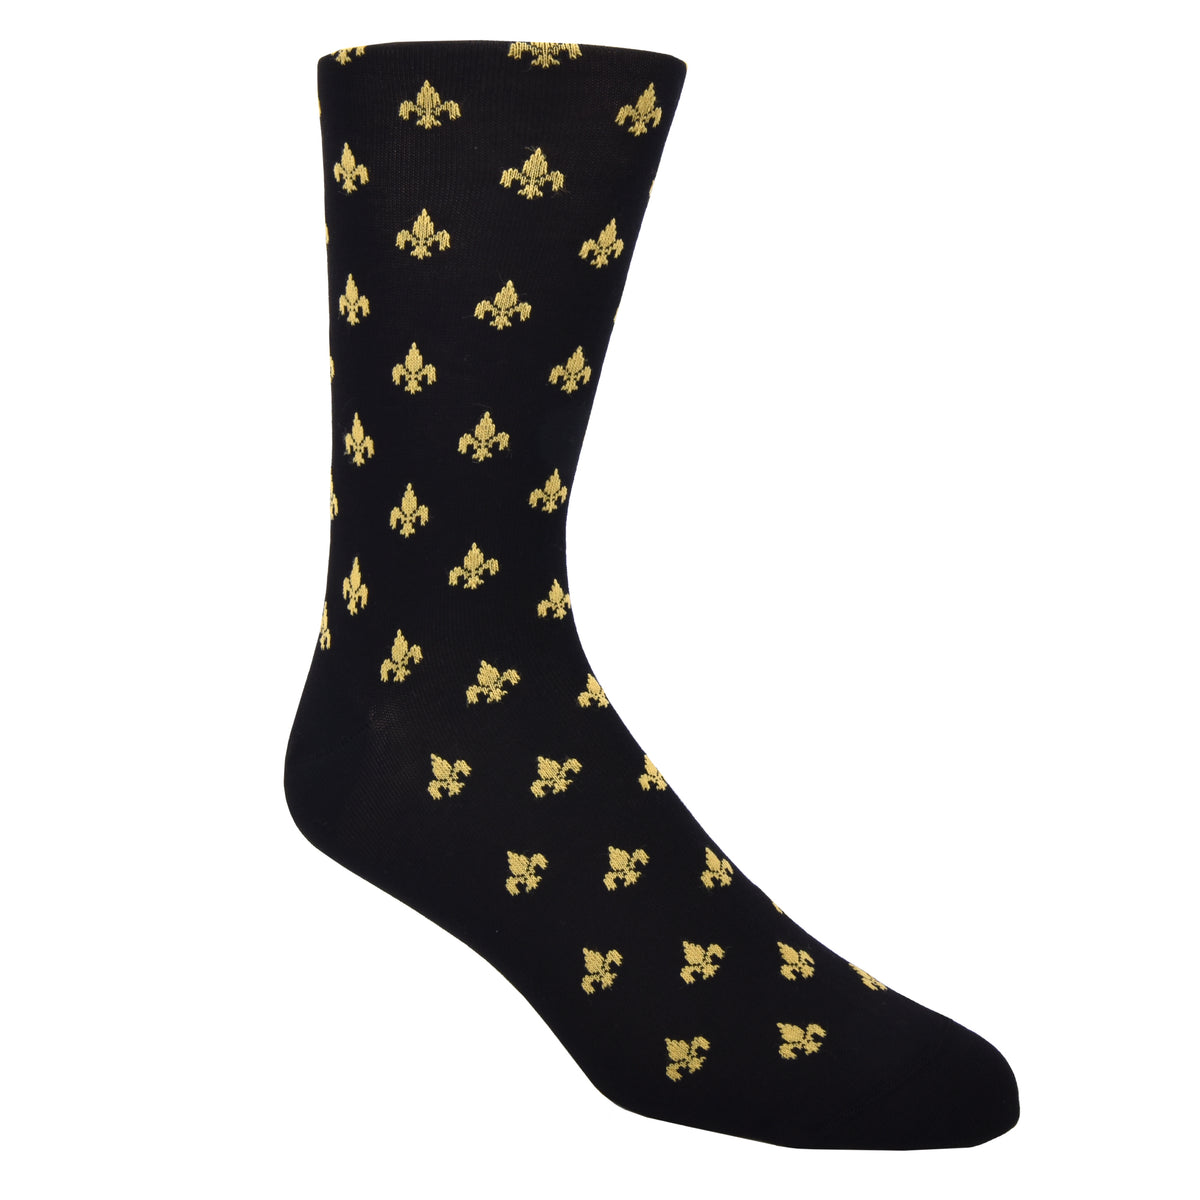 Royalty &amp; revelry, saints and sinners...whatever you&#39;re up to, life is too short to wear boring socks! #damnright  70% Mercerized Cotton 29% Nylon 1% Spandex Fits Size 8-12 Machine Washable Made in the USA